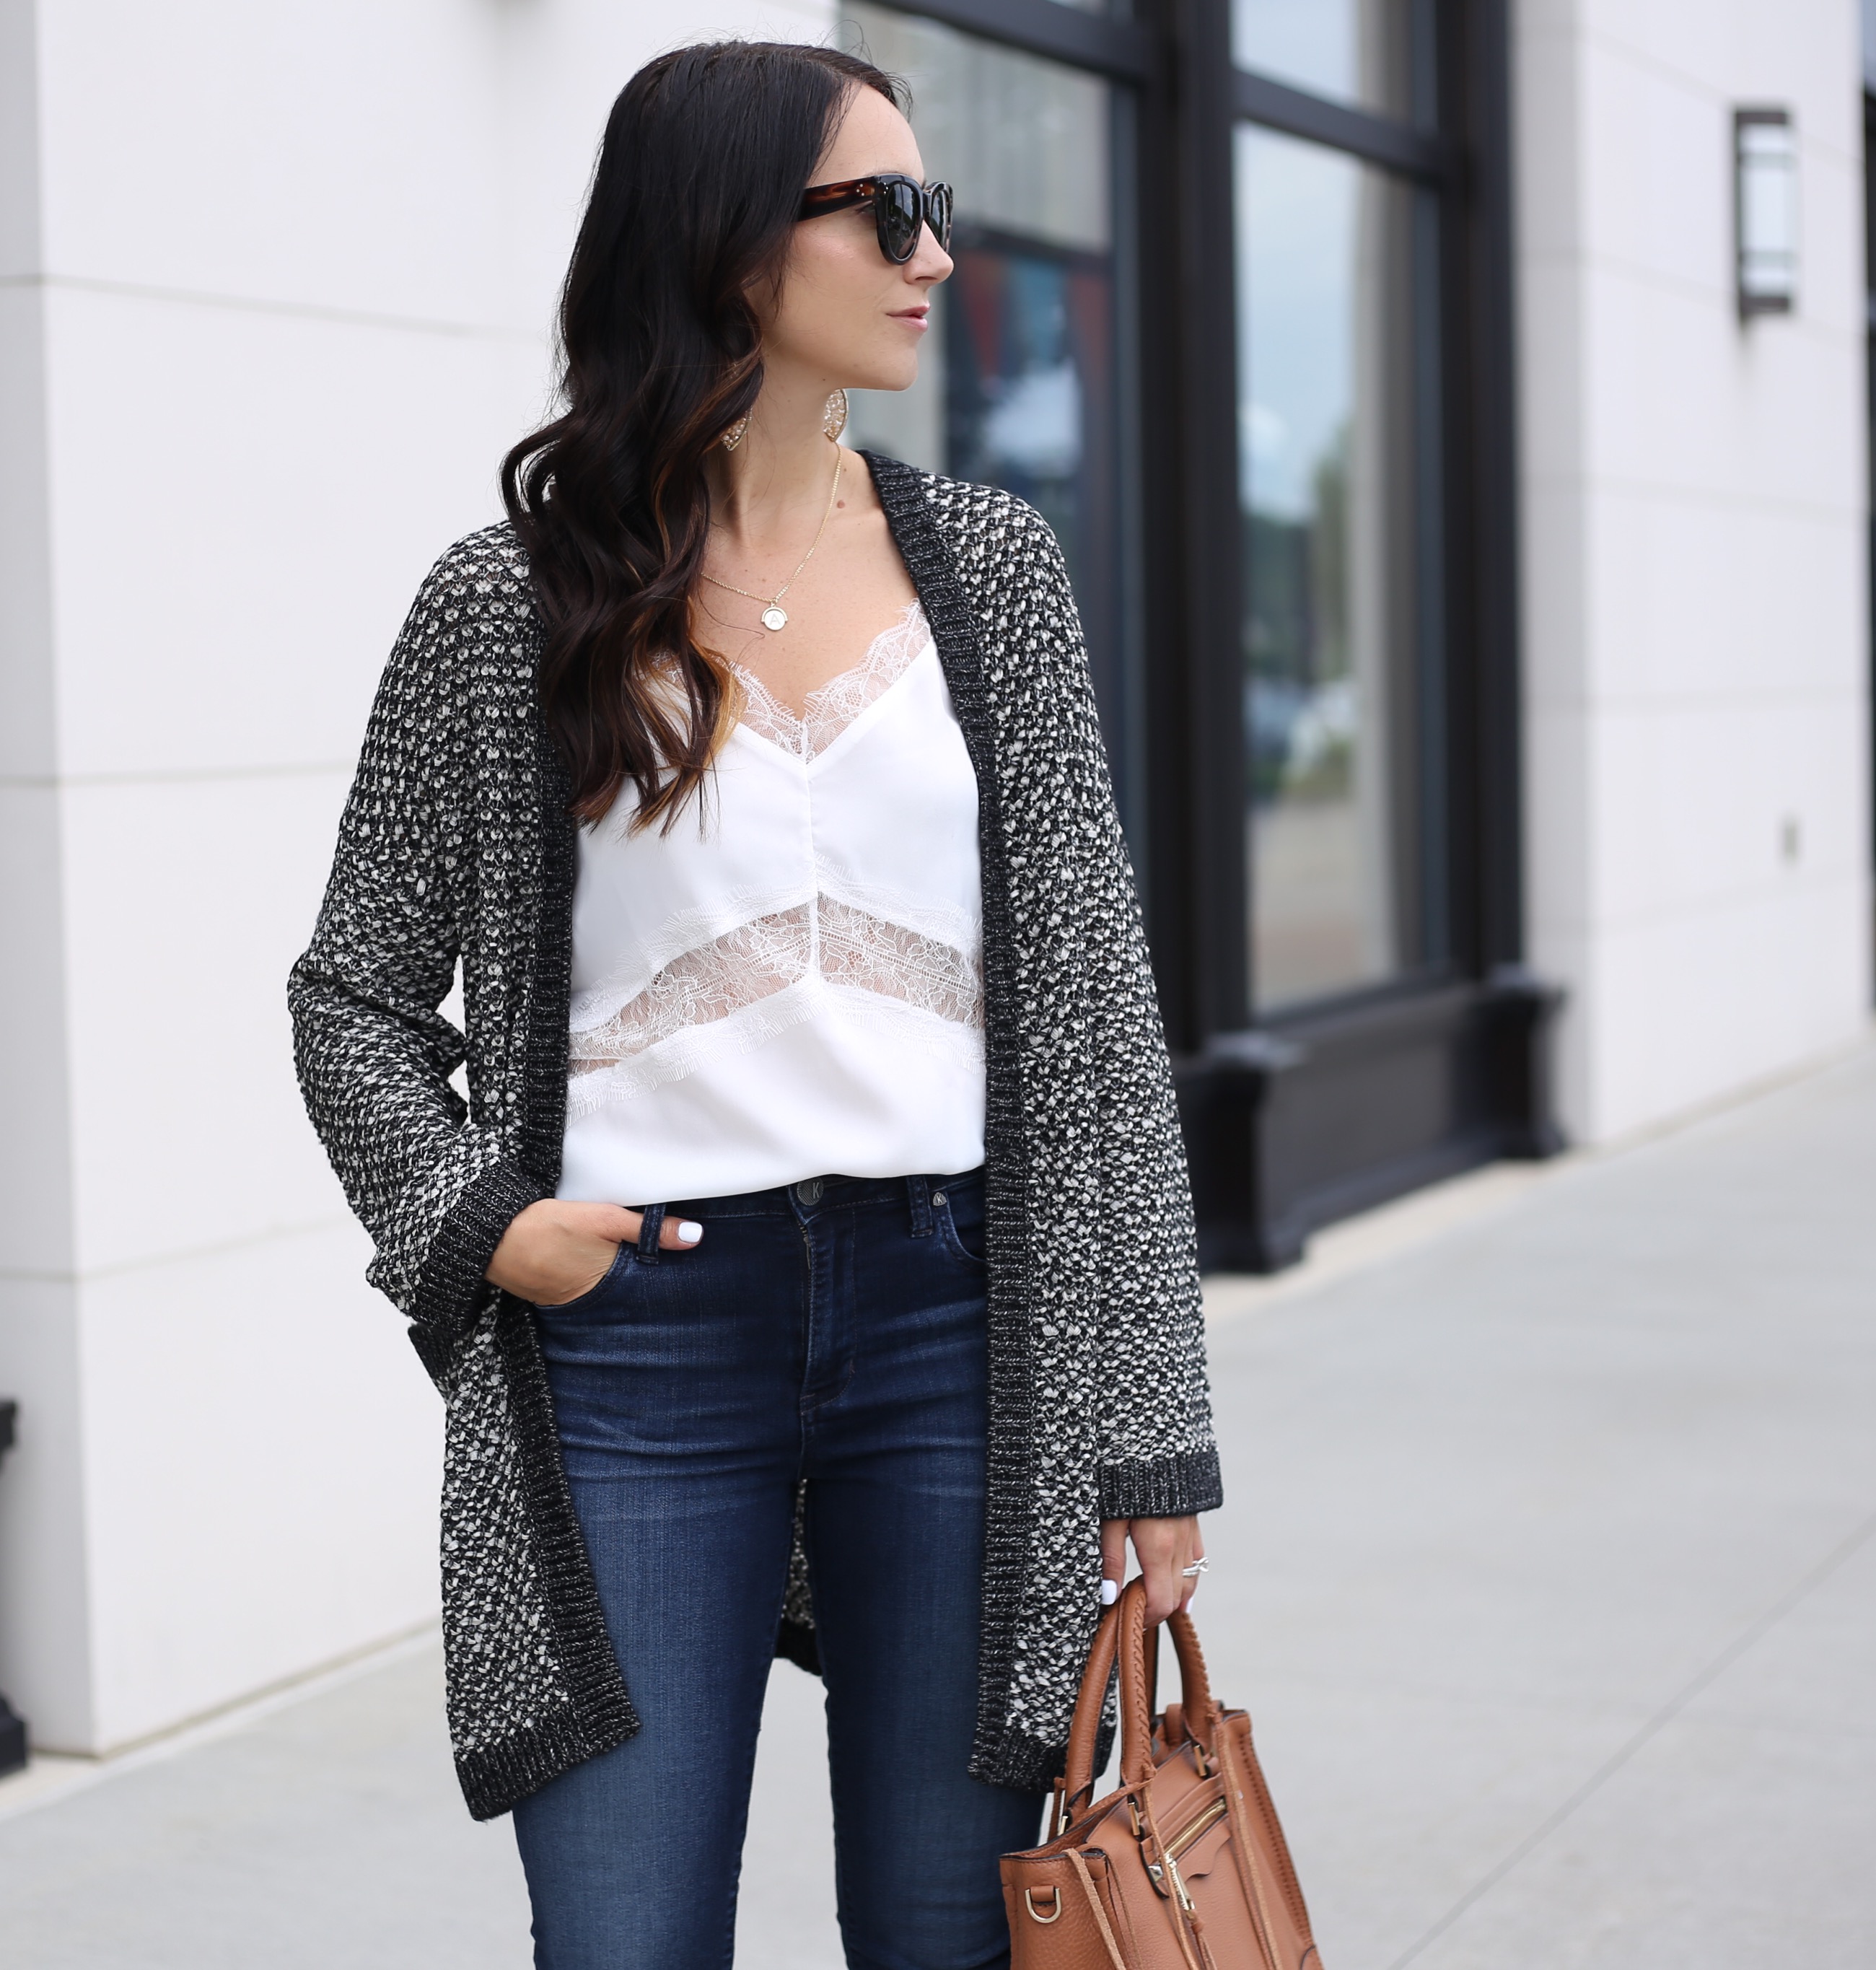 fashion blogger anna monteiro of blushing rose style blog wearing perfect fall cardigan caslon textured boyfriend cardigan from nordstrom